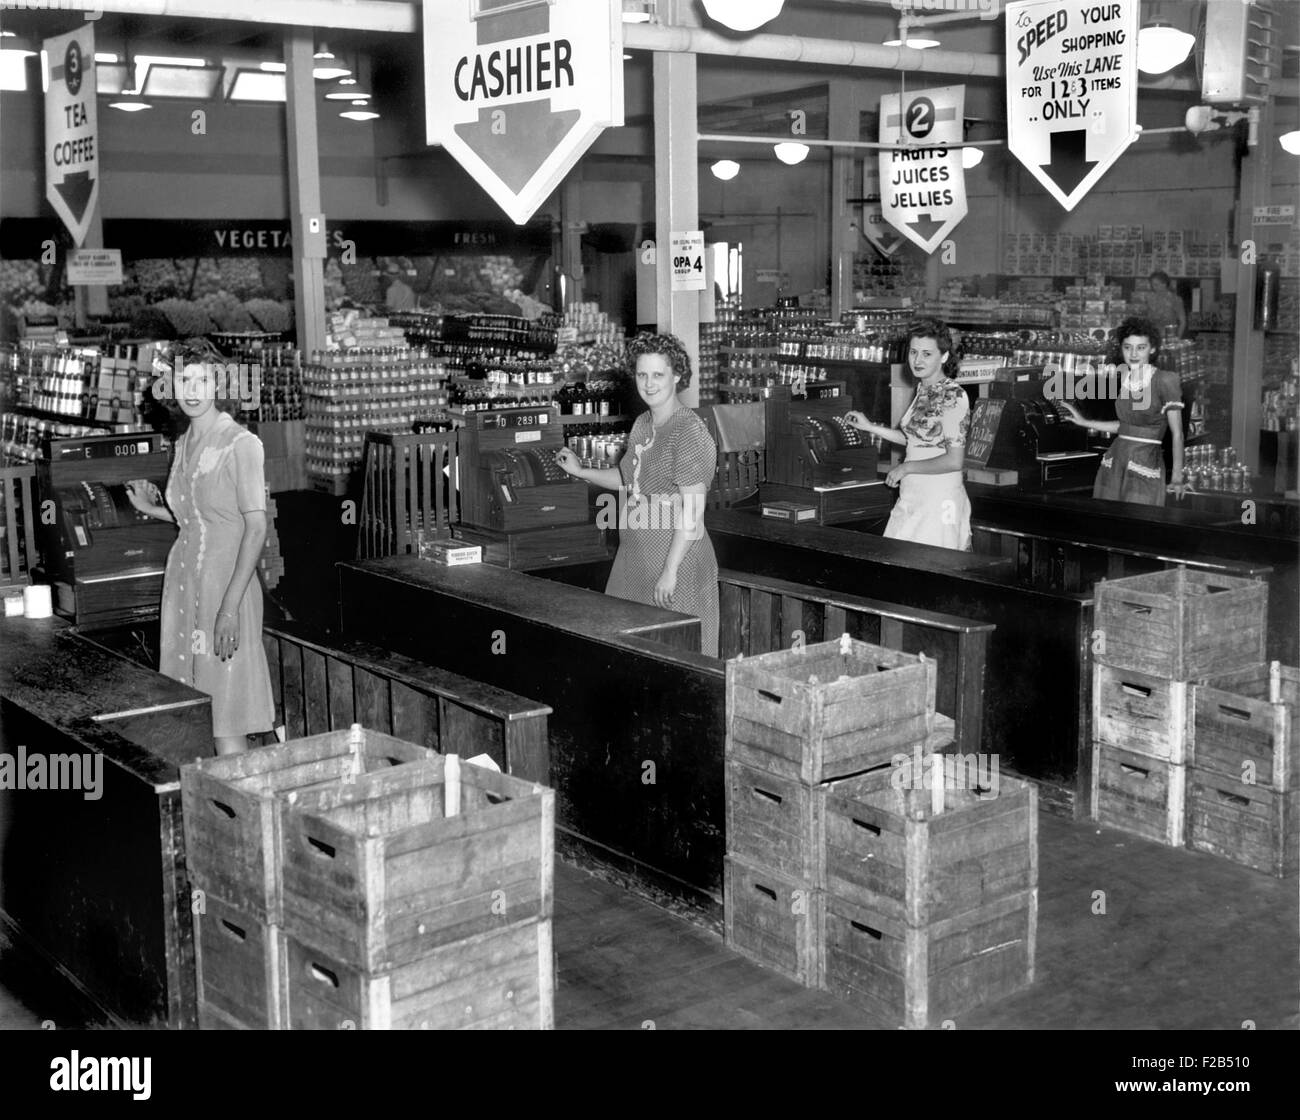 Four cash registers at a new supermarket, Tulip Town Market, 1945 in Oak Ridge, Tennessee. - (BSLOC 2015 1 163) Stock Photo